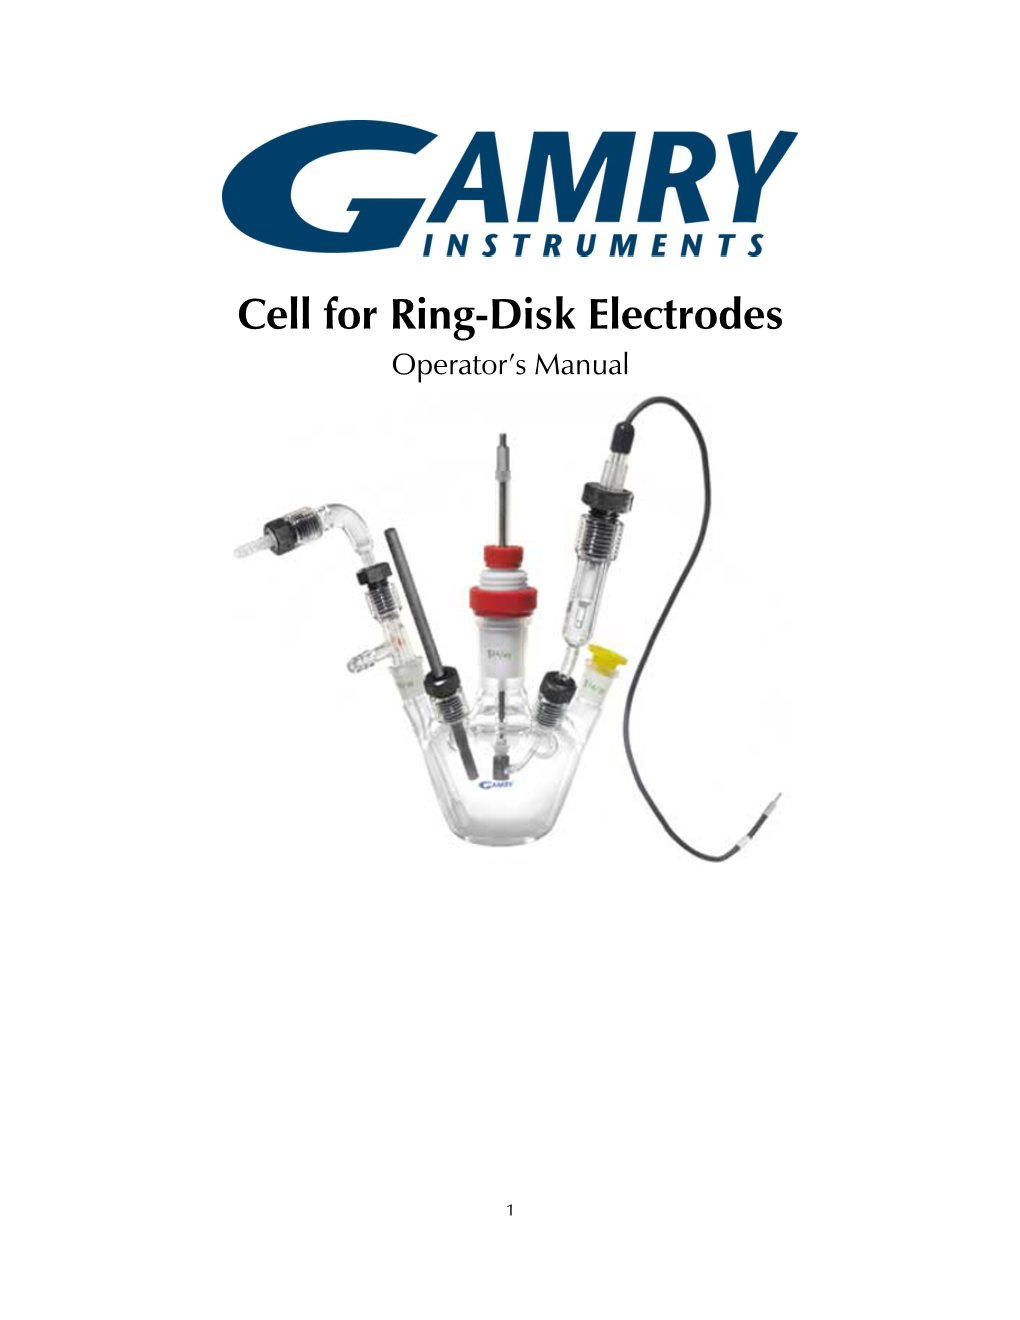 Rotating Disk Electrode Cell Manual